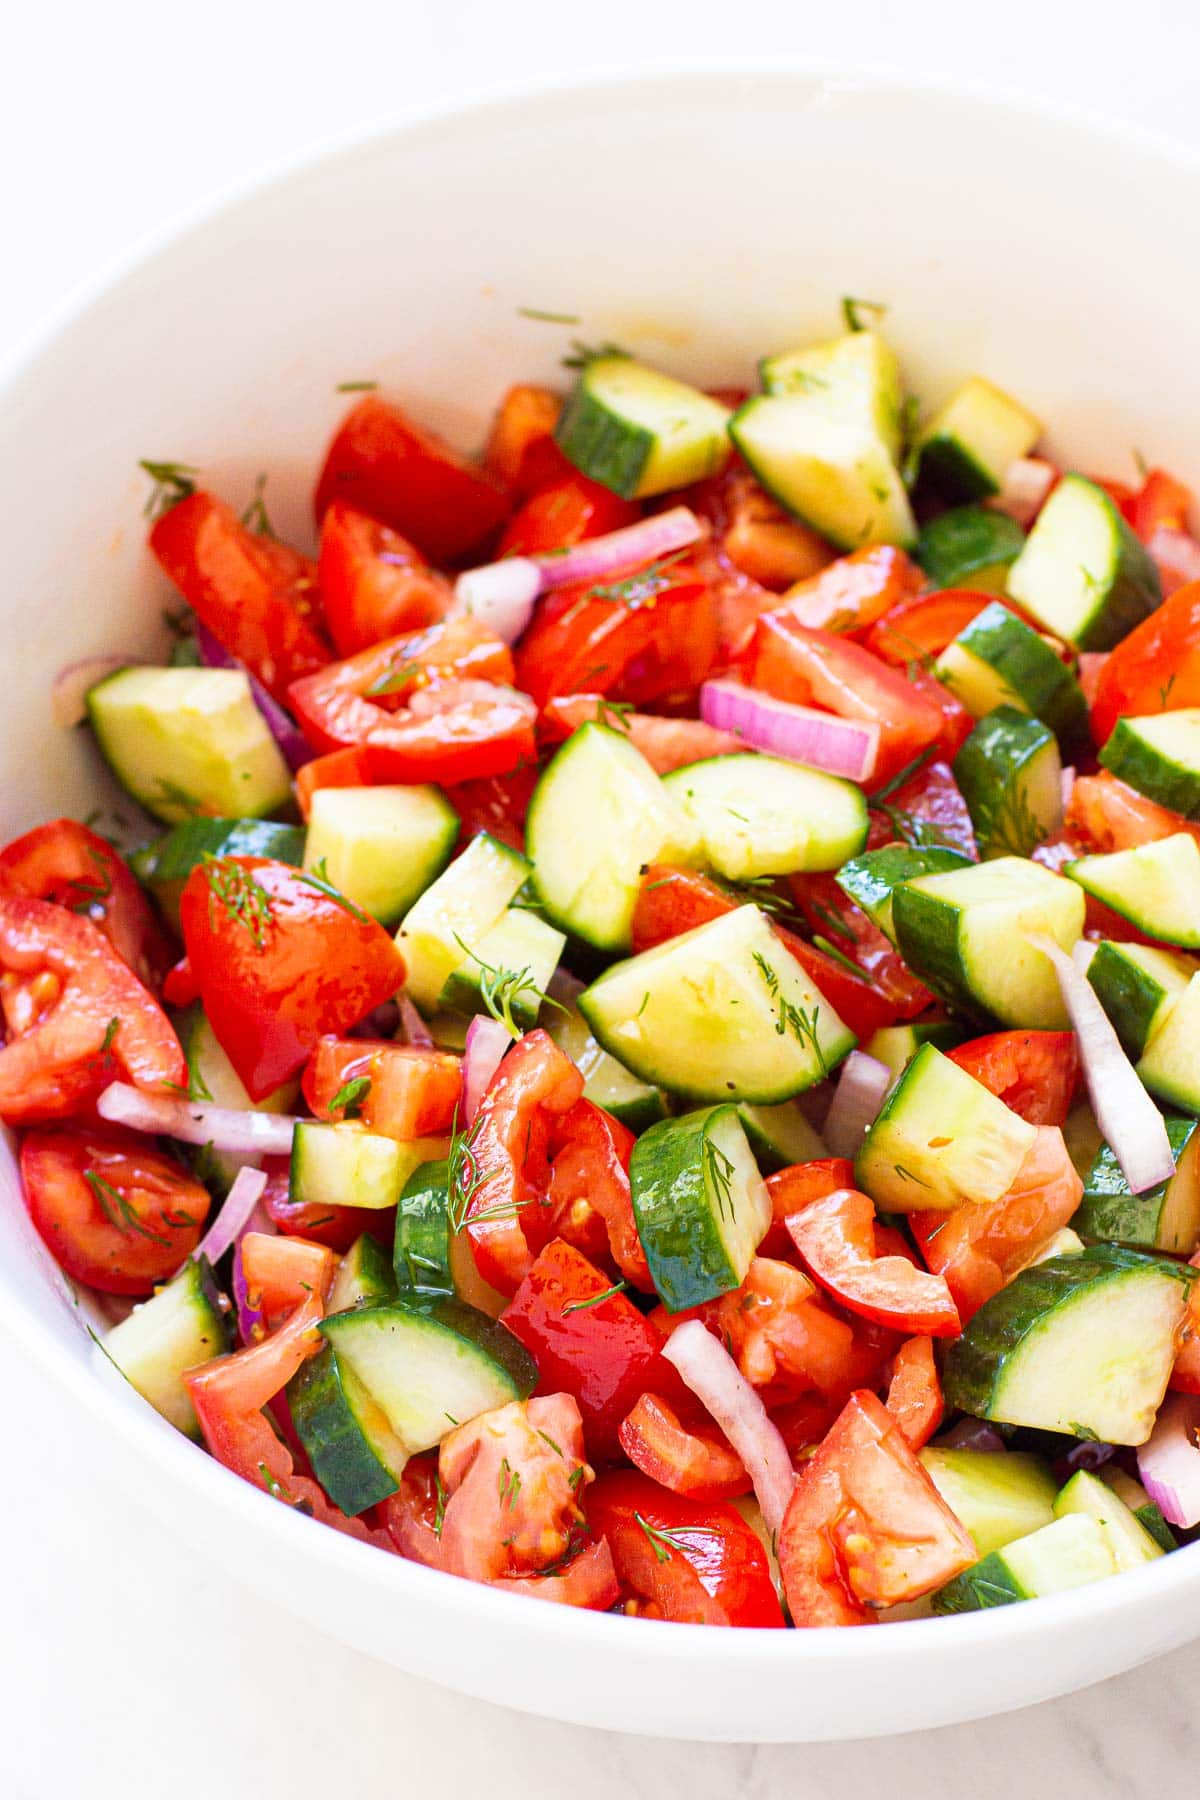 Cucumber and tomato salad with red onion and dill in white bowl.